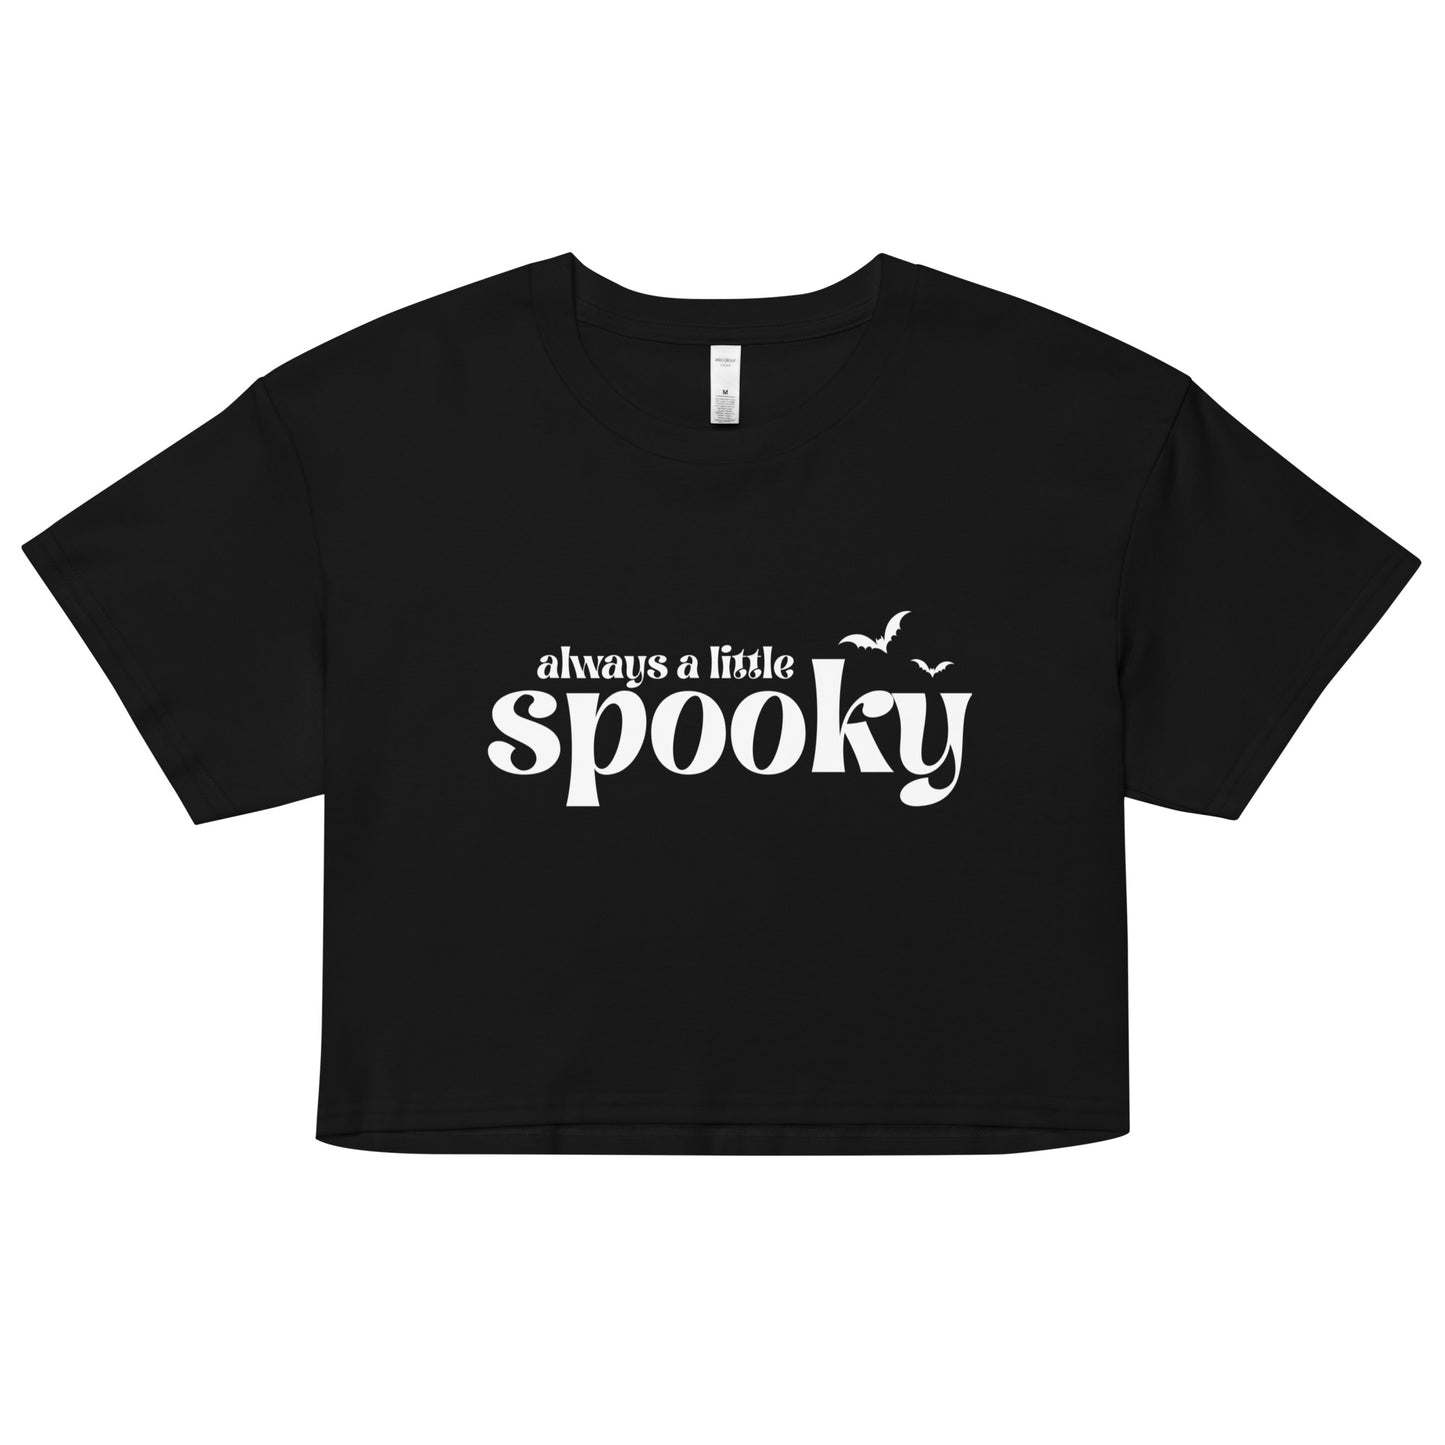 A black, cropped t-shirt that says "always a little spooky" in a trendy white font